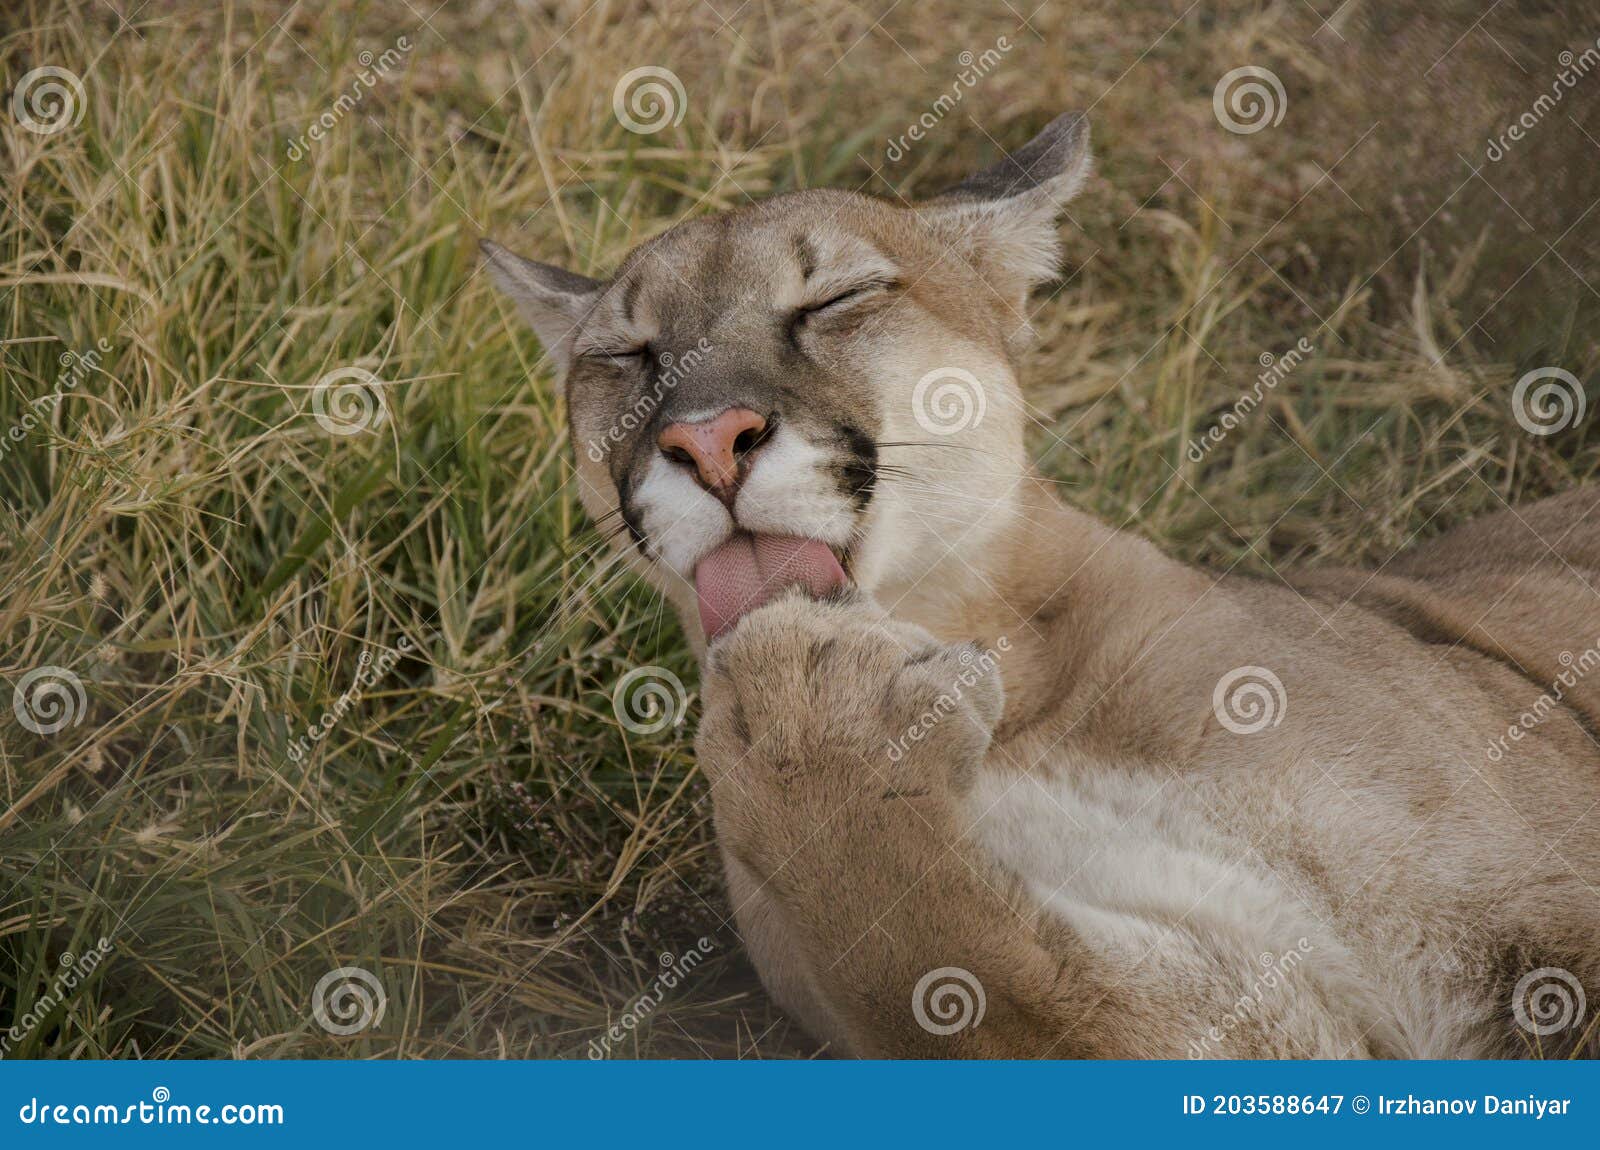 Big Kitty Puma Licking Her Paw Stock Image - Image of claw, furries:  203588647